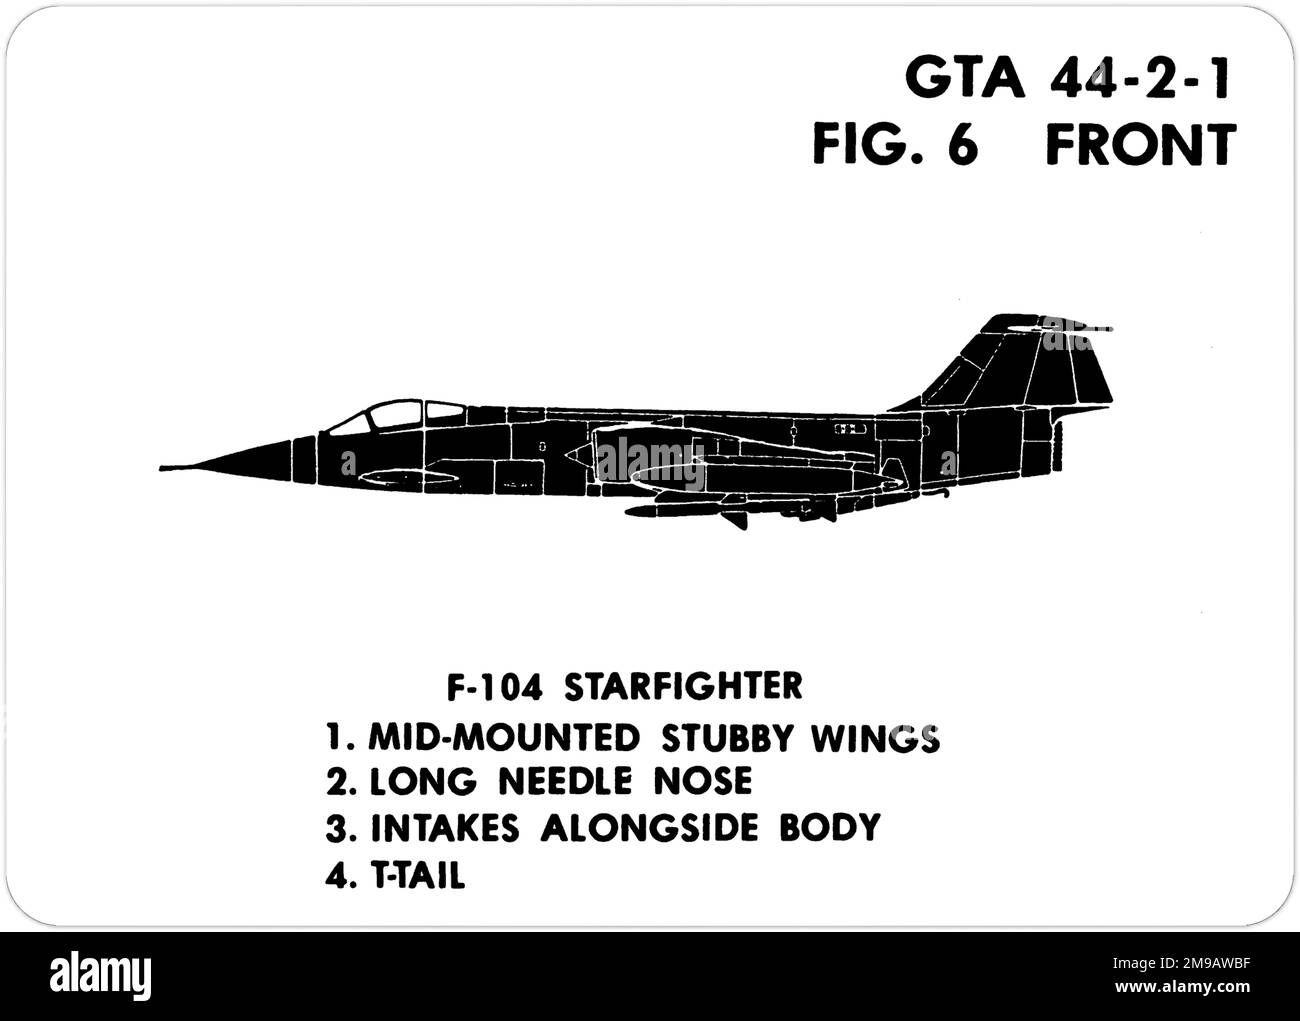 Lockheed F-104S Starfighter. This is one of the series of Graphics Training Aids (GTA) used by the United States Army to train their personnel to recognize friendly and hostile aircraft. This particular set, GTA 44-2-1, was issued in July1977. The set features aircraft from: Canada, Italy, United Kingdom, United States, and the USSR. Stock Photo